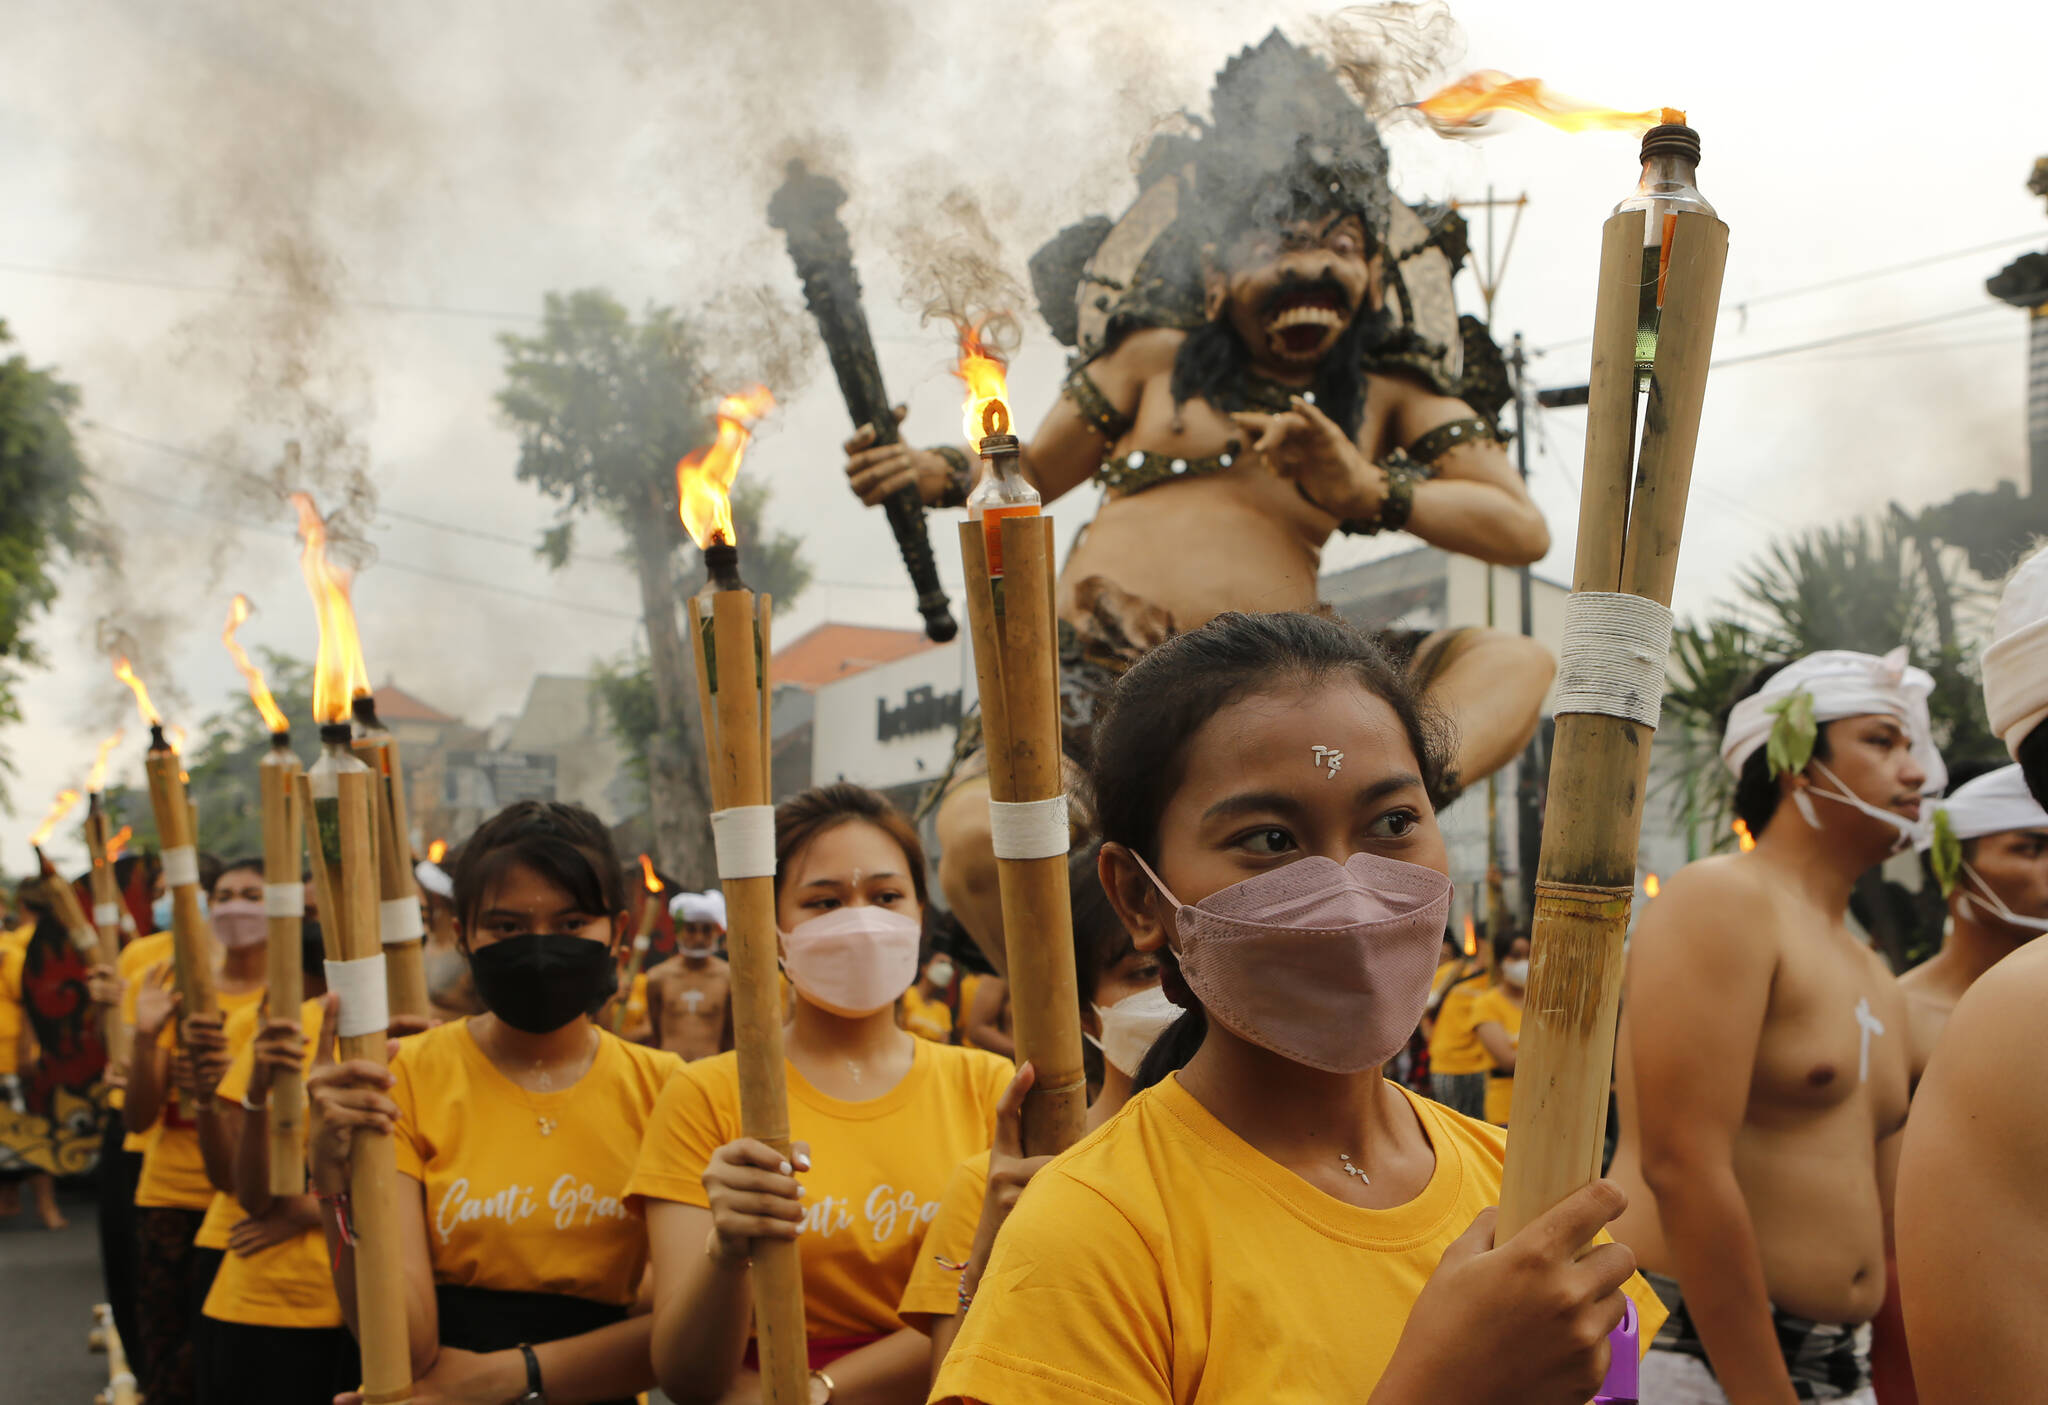 Women carrying torches line up in front of a giant effigy locally known as “ogoh-ogoh” that represents evil spirits during Nyepi celebration, the annual day of silence marking Balinese Hindu new year in Bali, Indonesia on Wednesday, March 2, 2022. (AP Photo/Firdia Lisnawati)